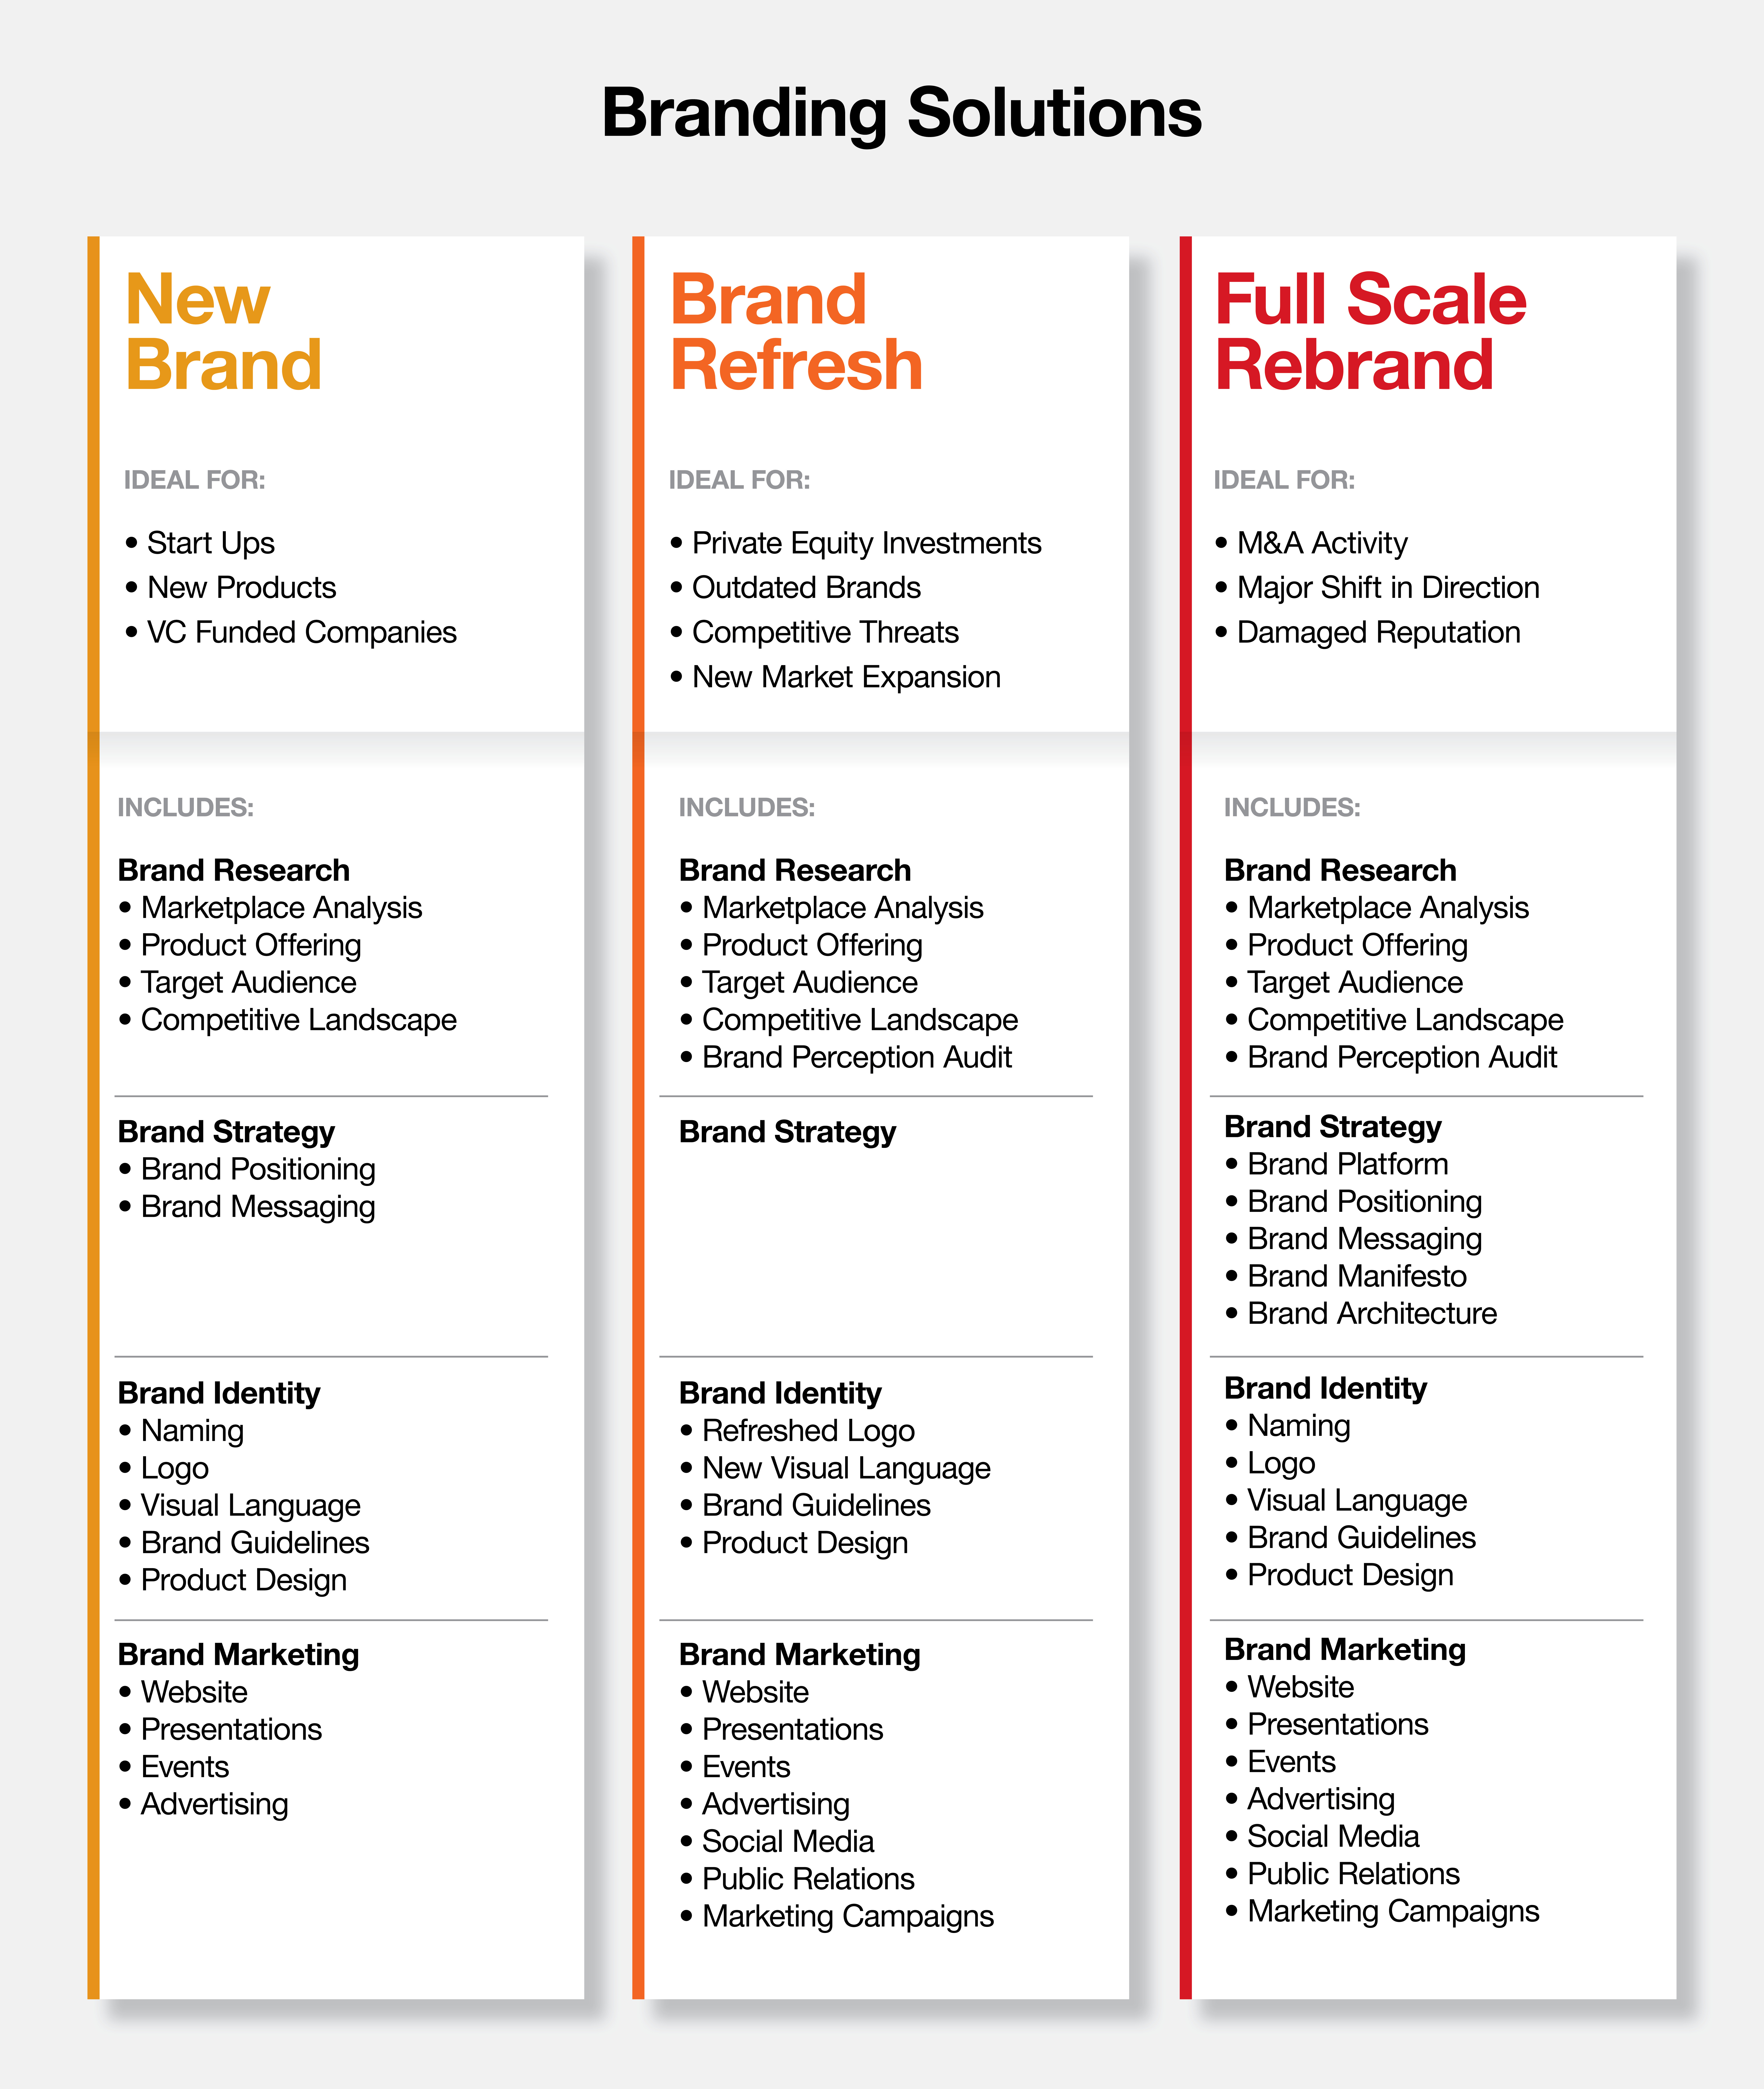 Solid Branding solutions comparison chart